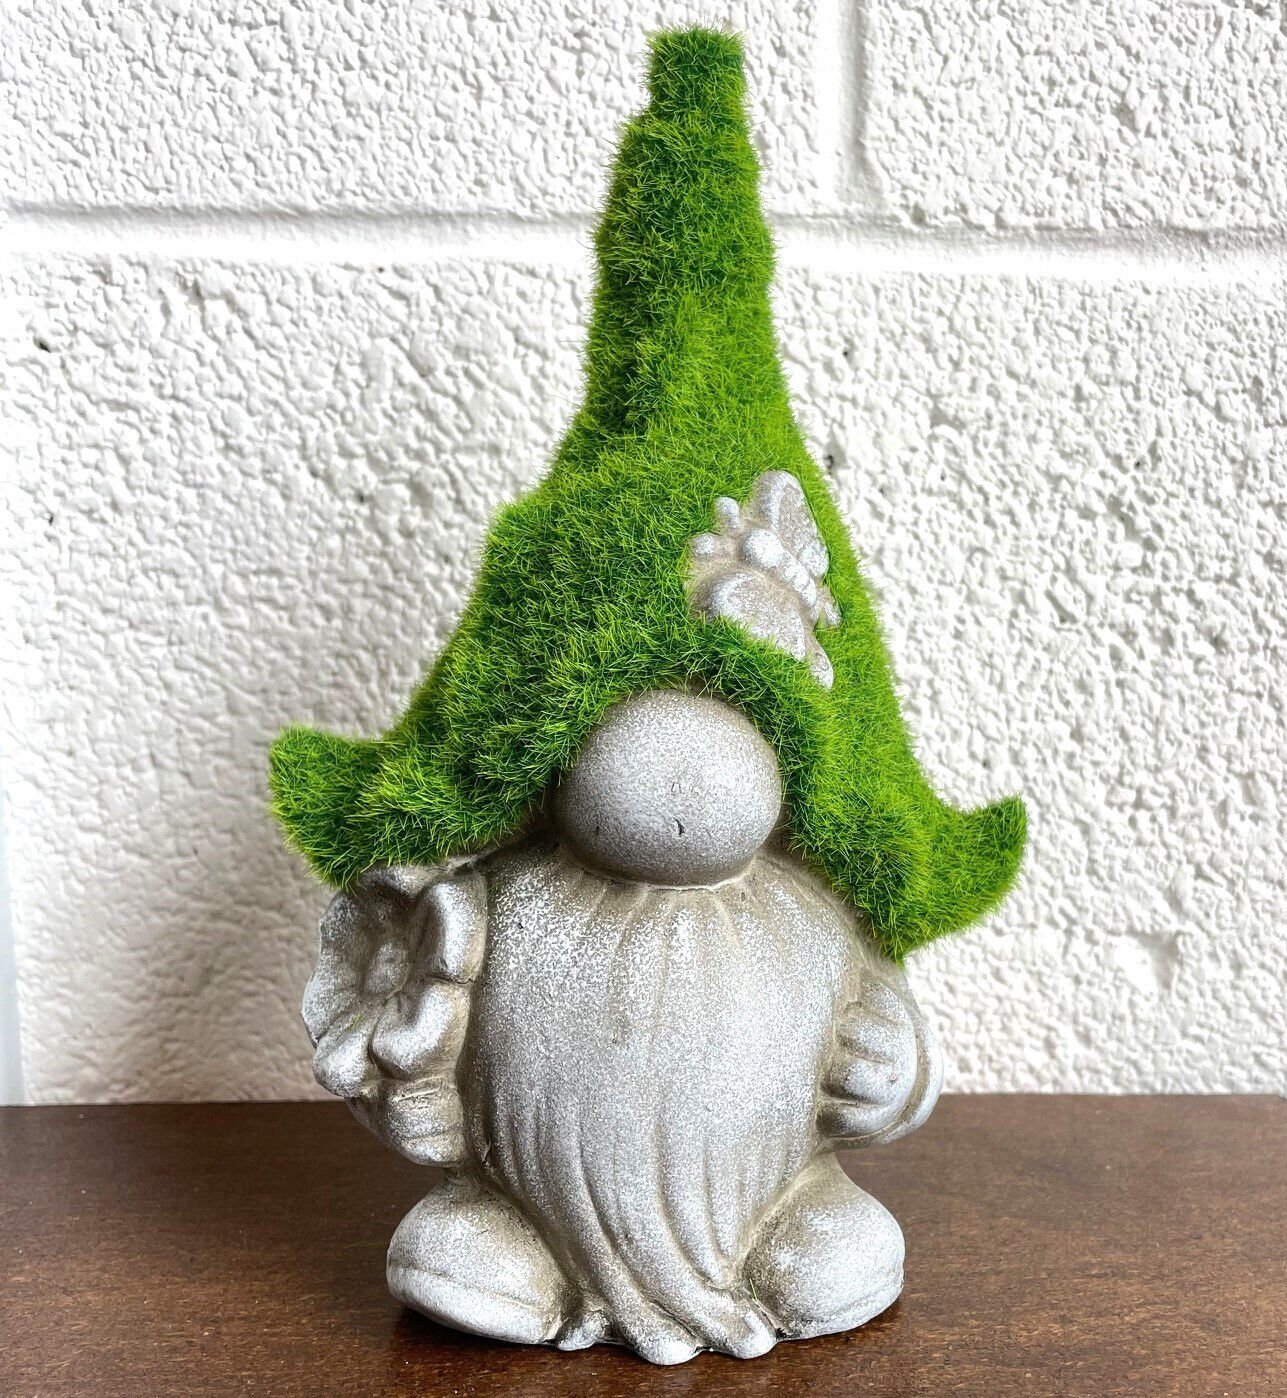 Gonk With Grassy Butterfly Hat Garden Gnome